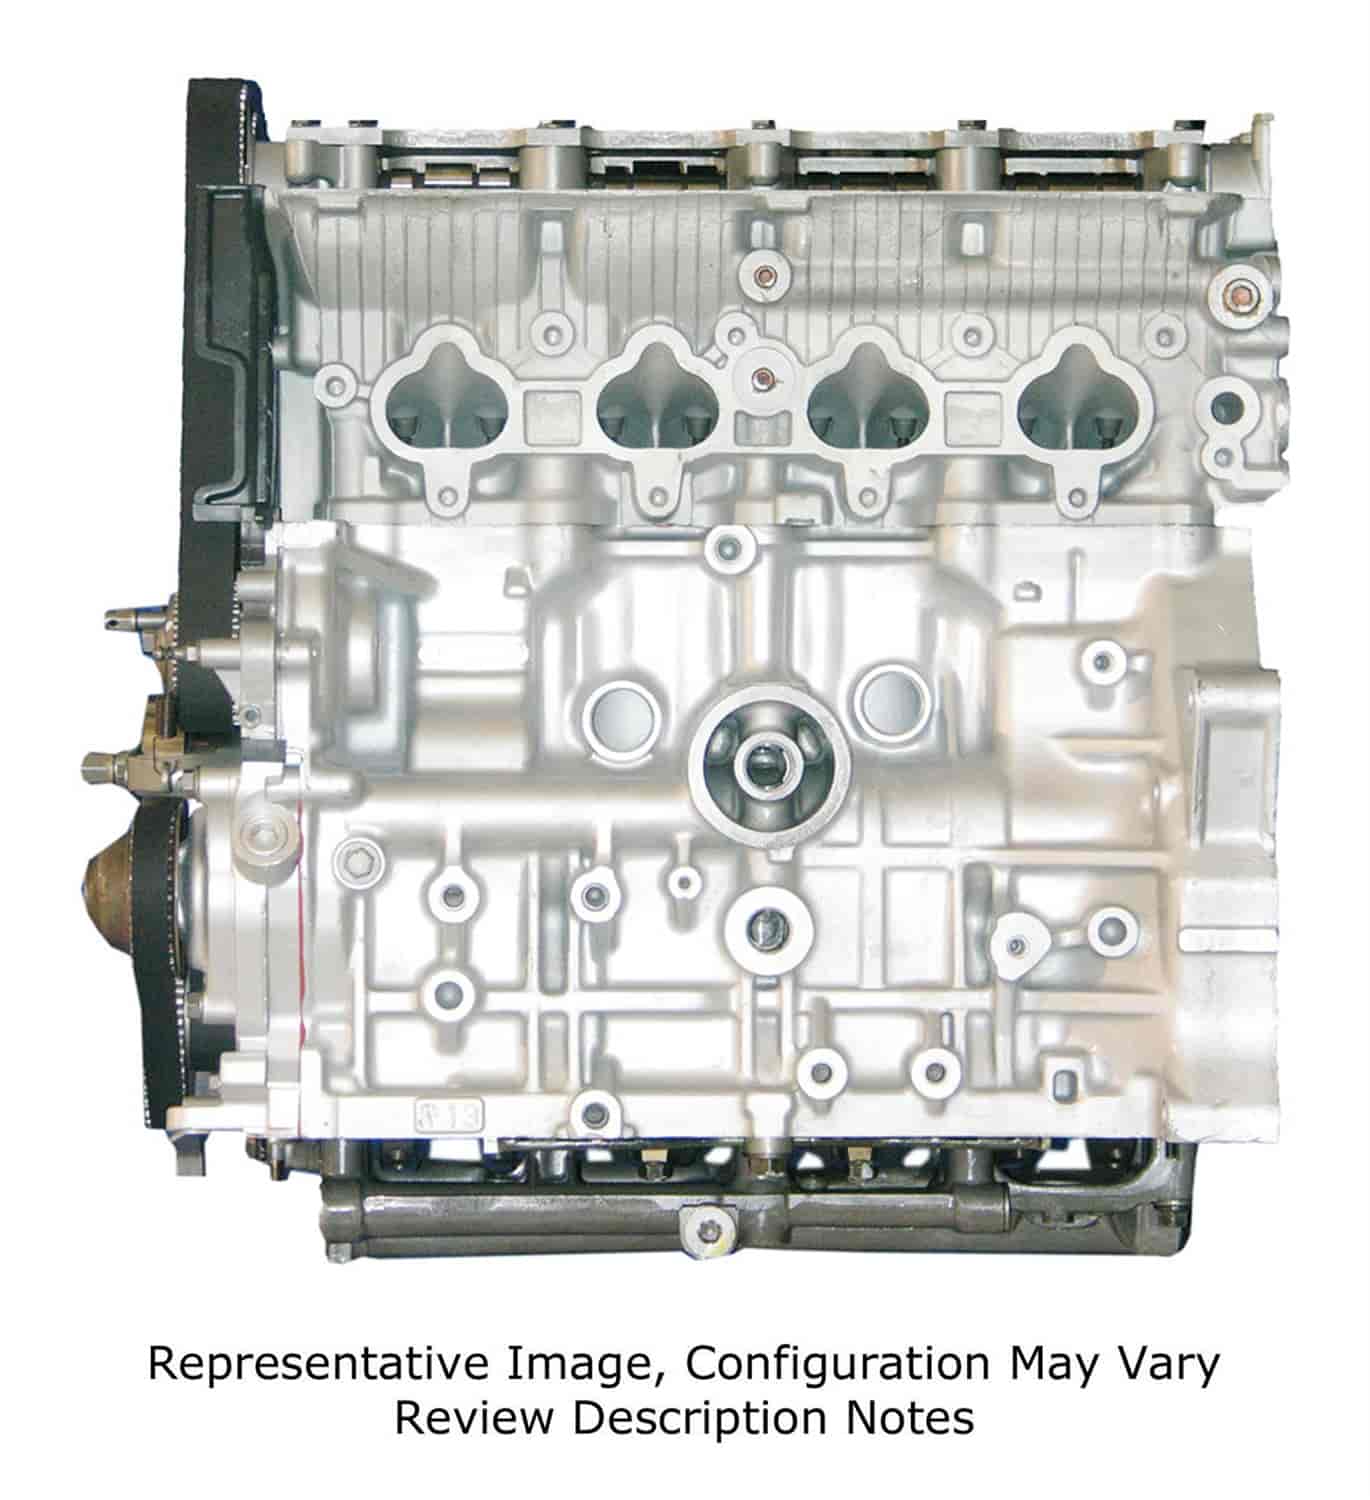 Remanufactured Crate Engine for 1996 Honda Prelude with